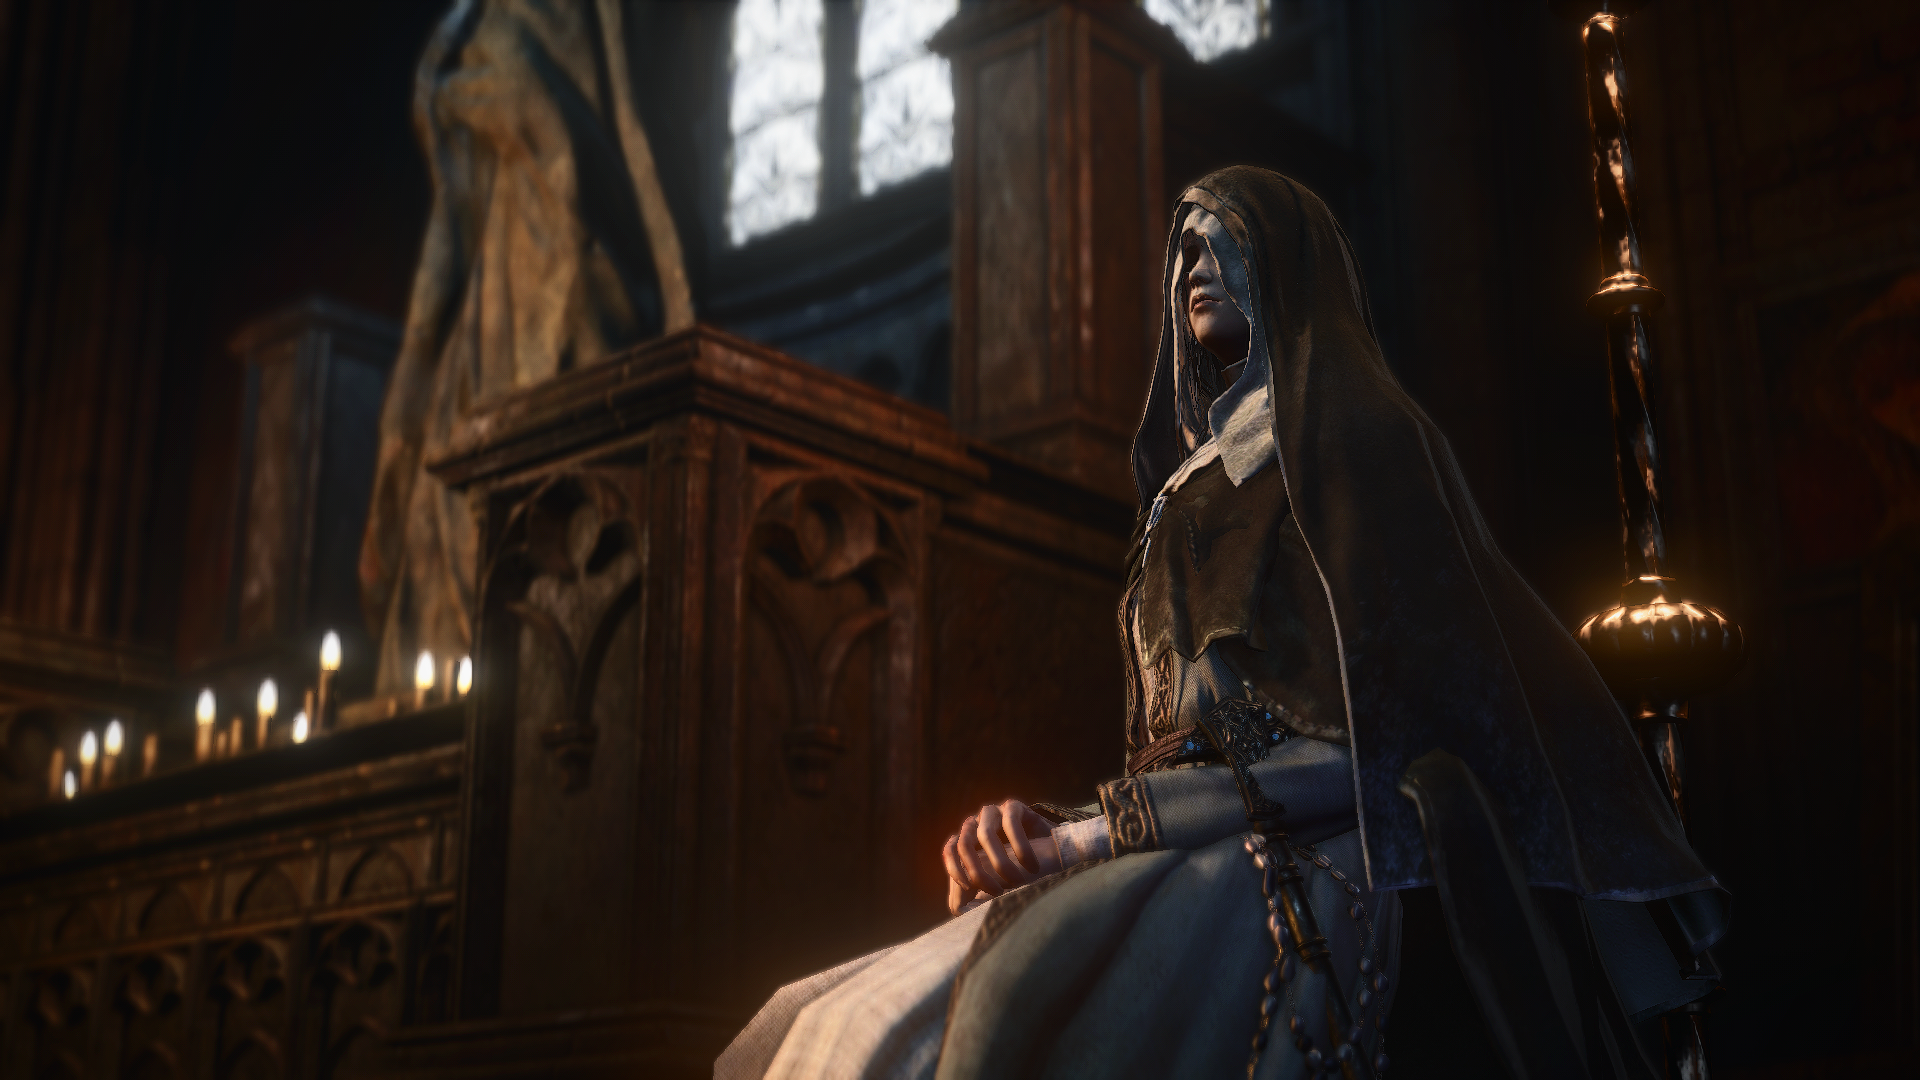 General 1920x1080 From Software Dark Souls Dark Souls III Sister Friede video games screen shot candles nun outfit video game art nuns indoors women indoors stained glass window video game characters CGI sitting